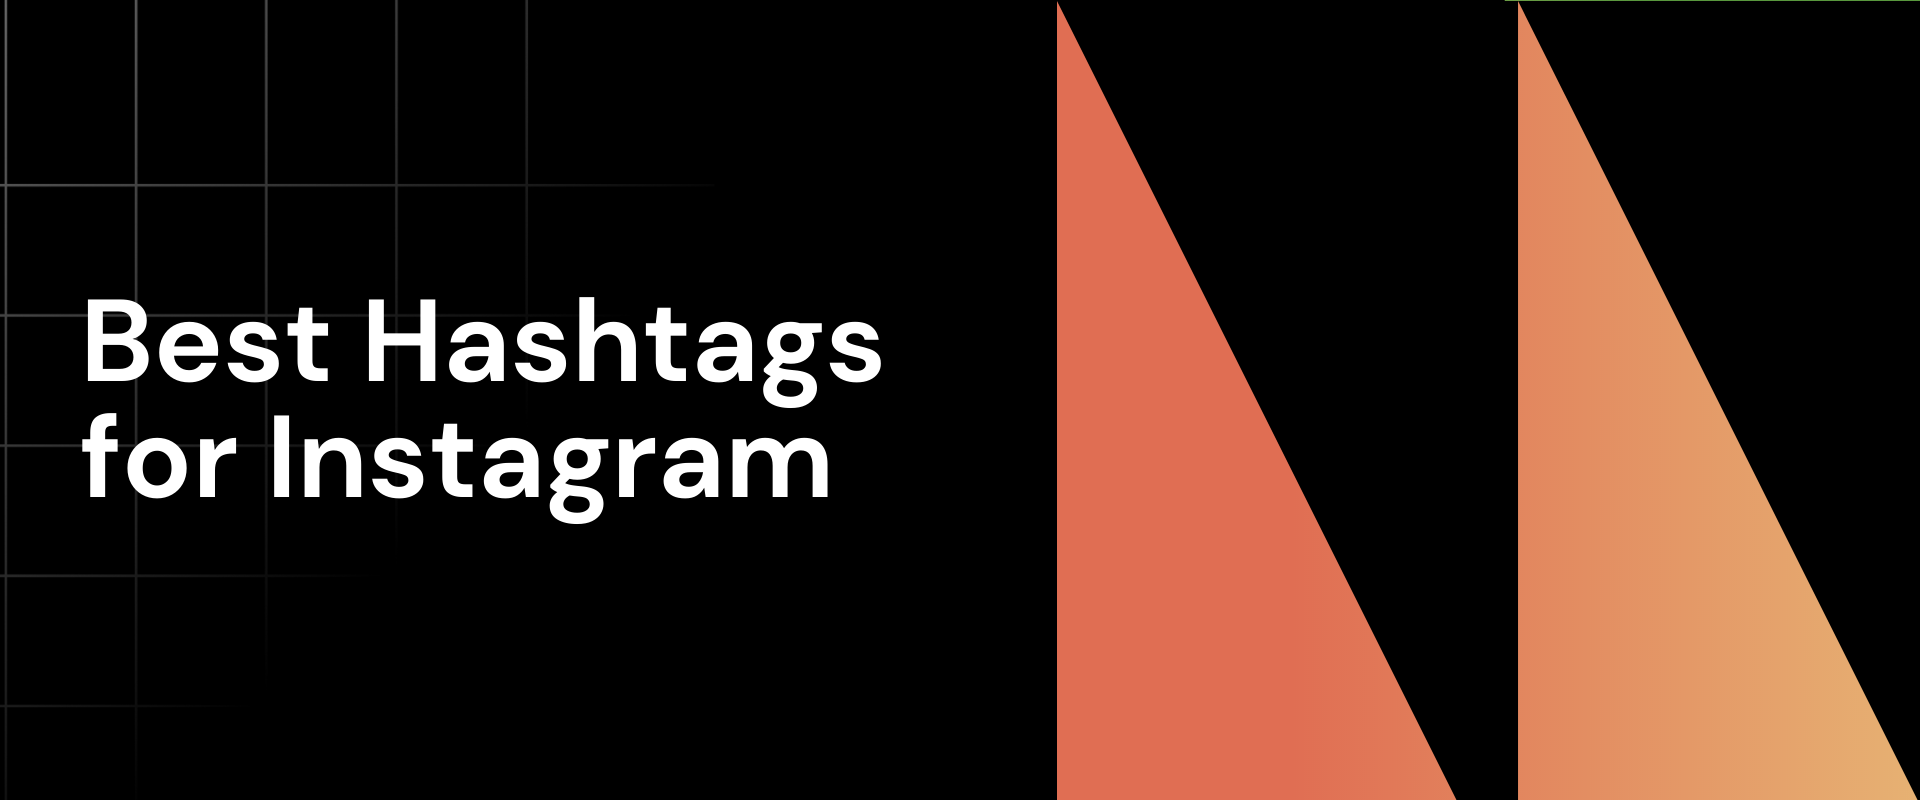 150+Best Hashtags for Instagram: How to find the most popular hashtags for Instagram Reels